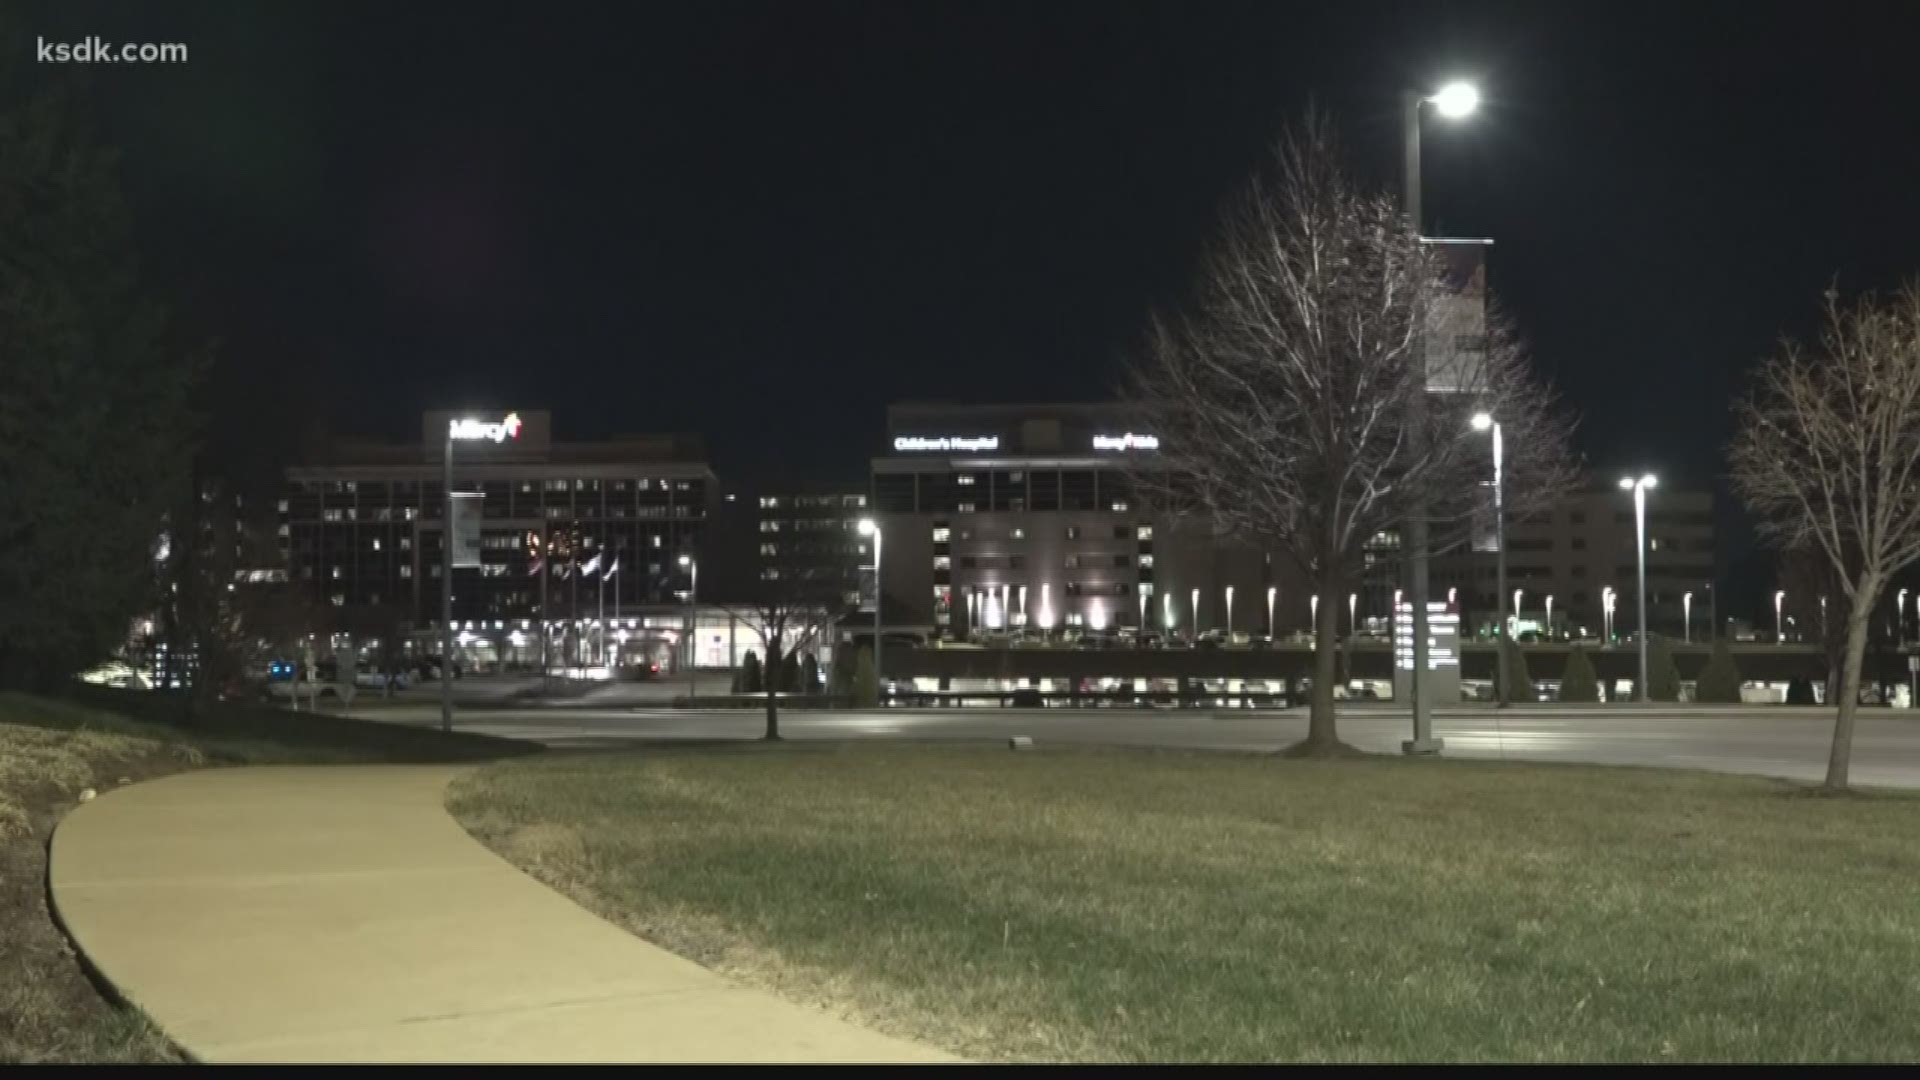 Robert Townsend reports live from Mercy Hospital in Creve Coeur where a woman tested positive for COVID-19. This is the first case in Missouri.